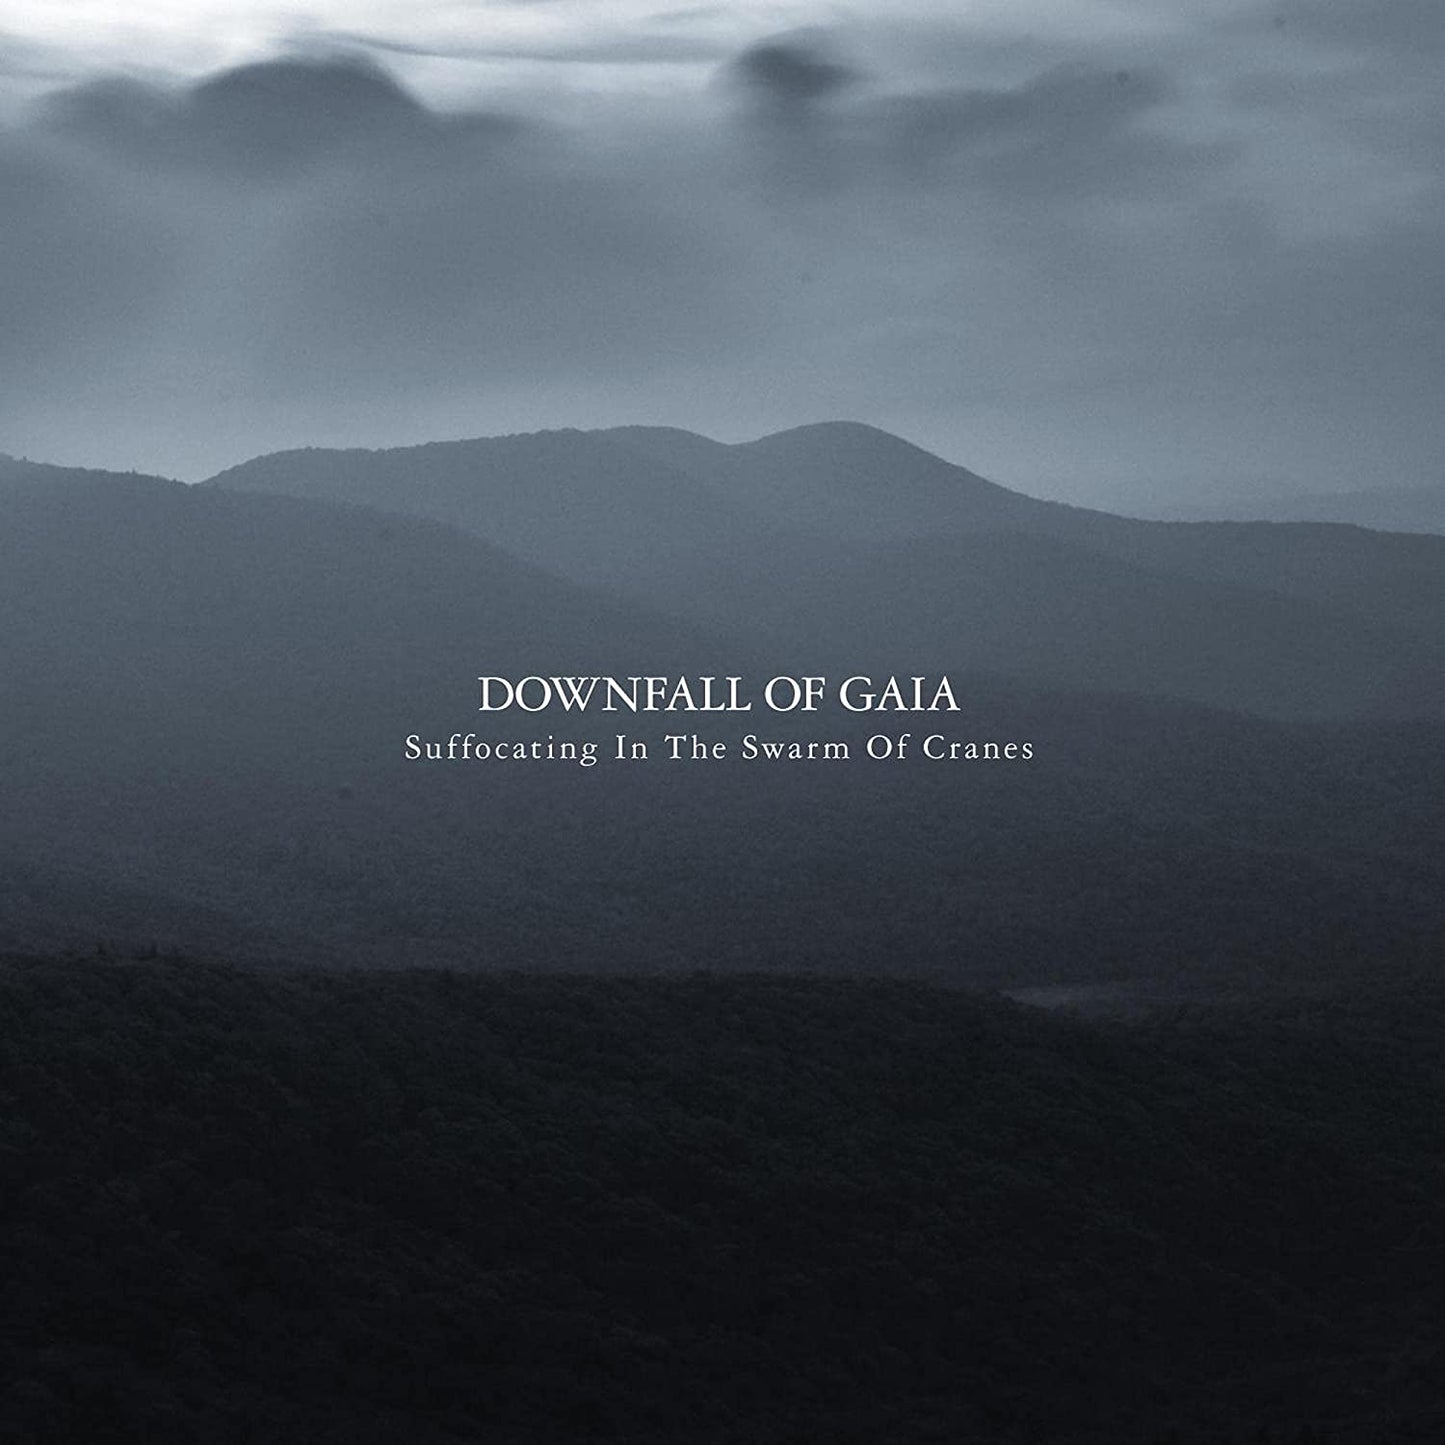 Downfall of Gaia - Suffocating In The Swarm Of Cranes CD